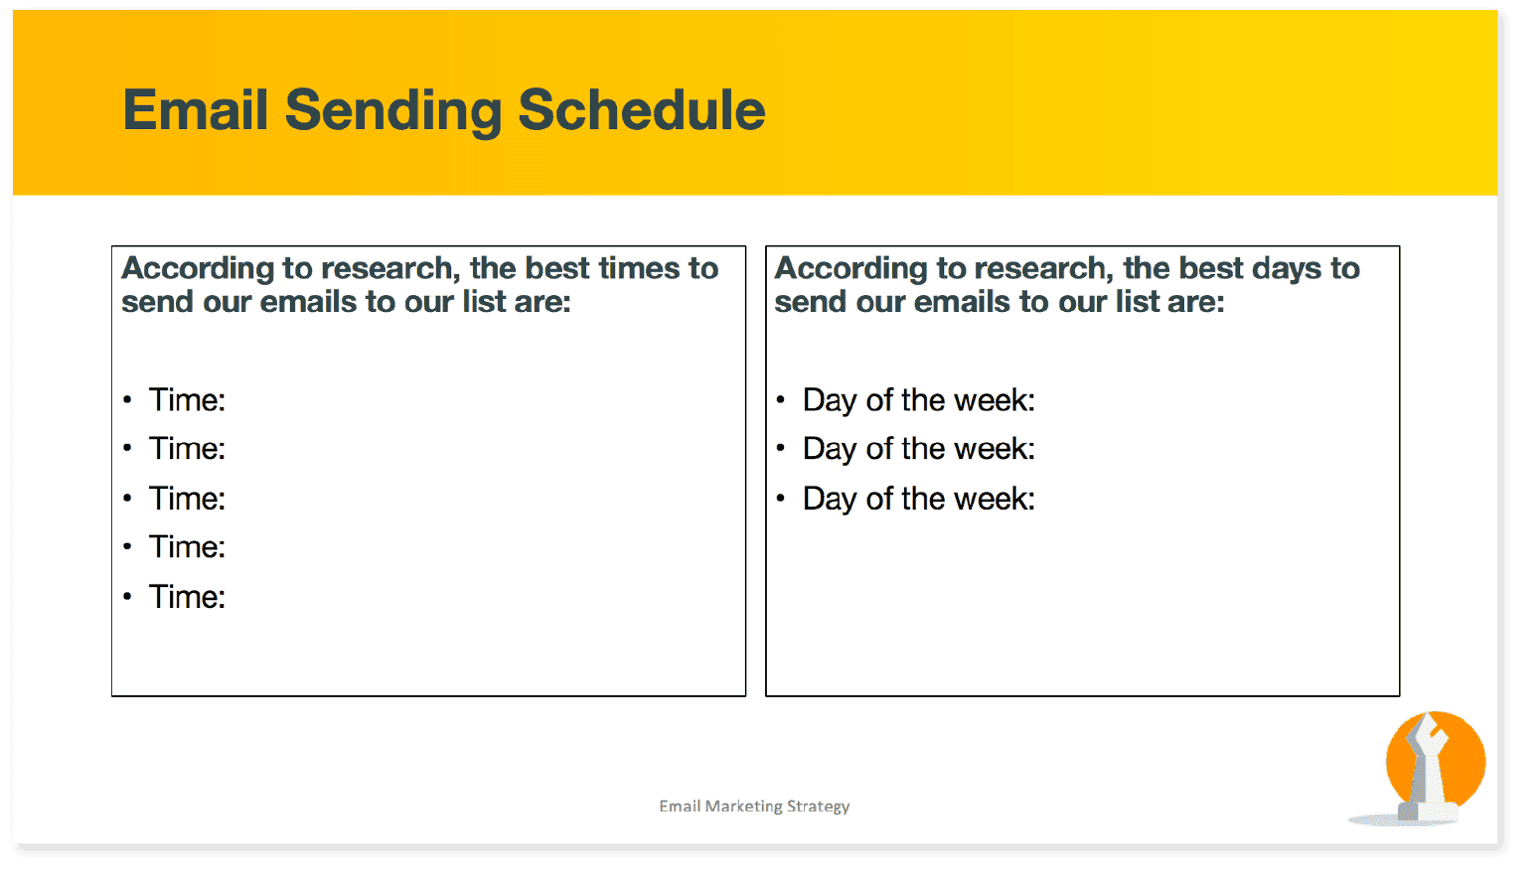 Adding a schedule to the strategy template